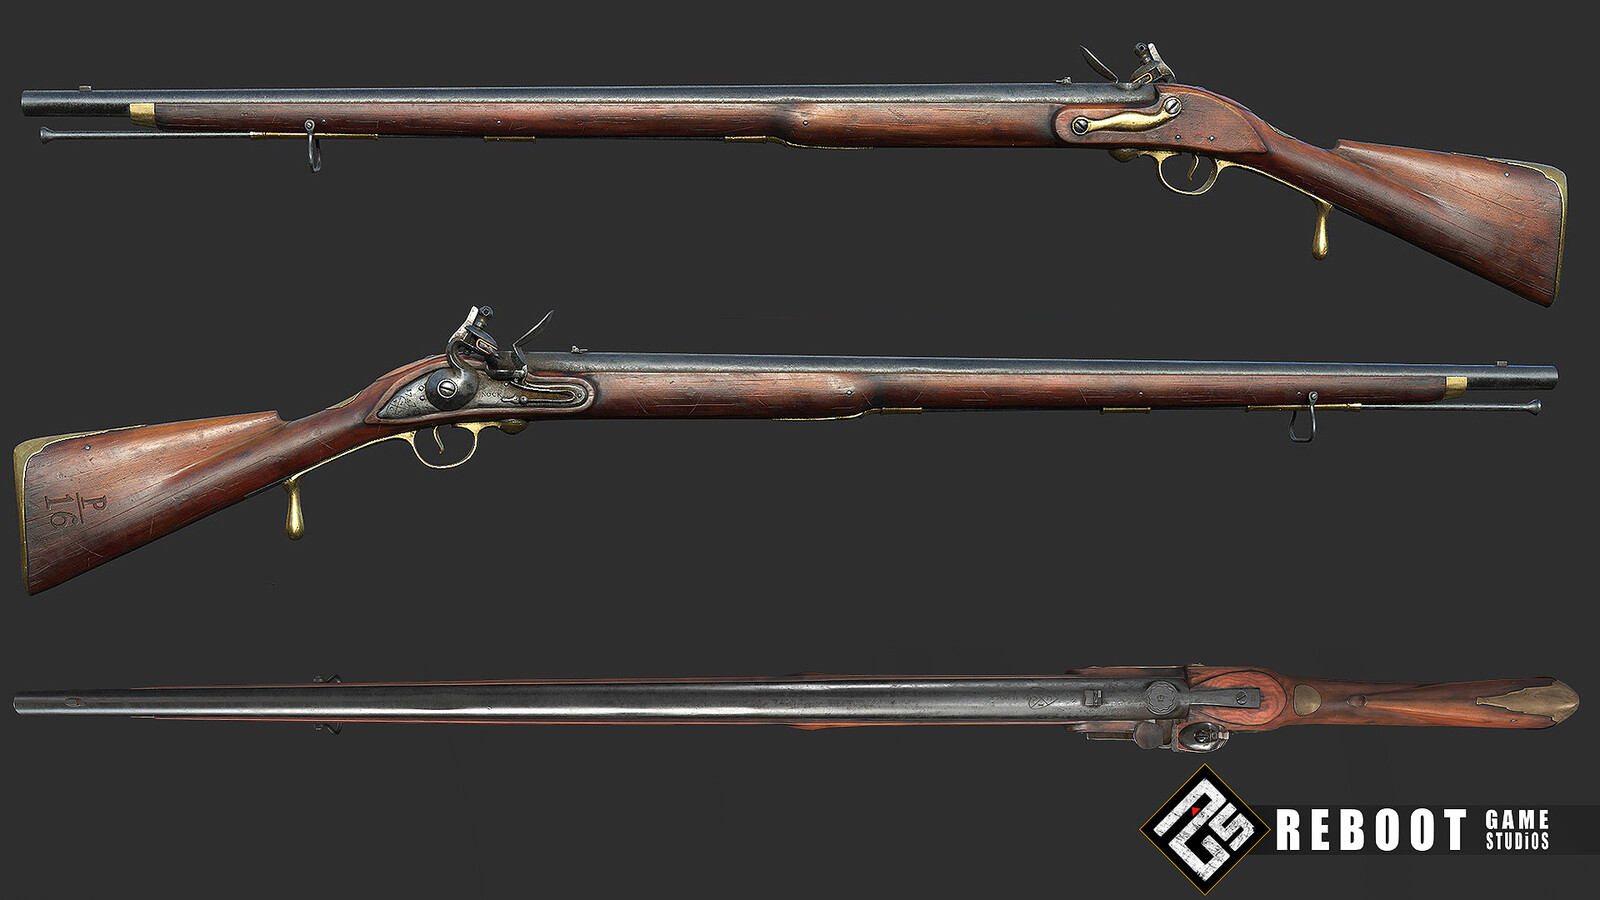 17th century weapons artwork done by Reboot team for a client                            - Used with permission.